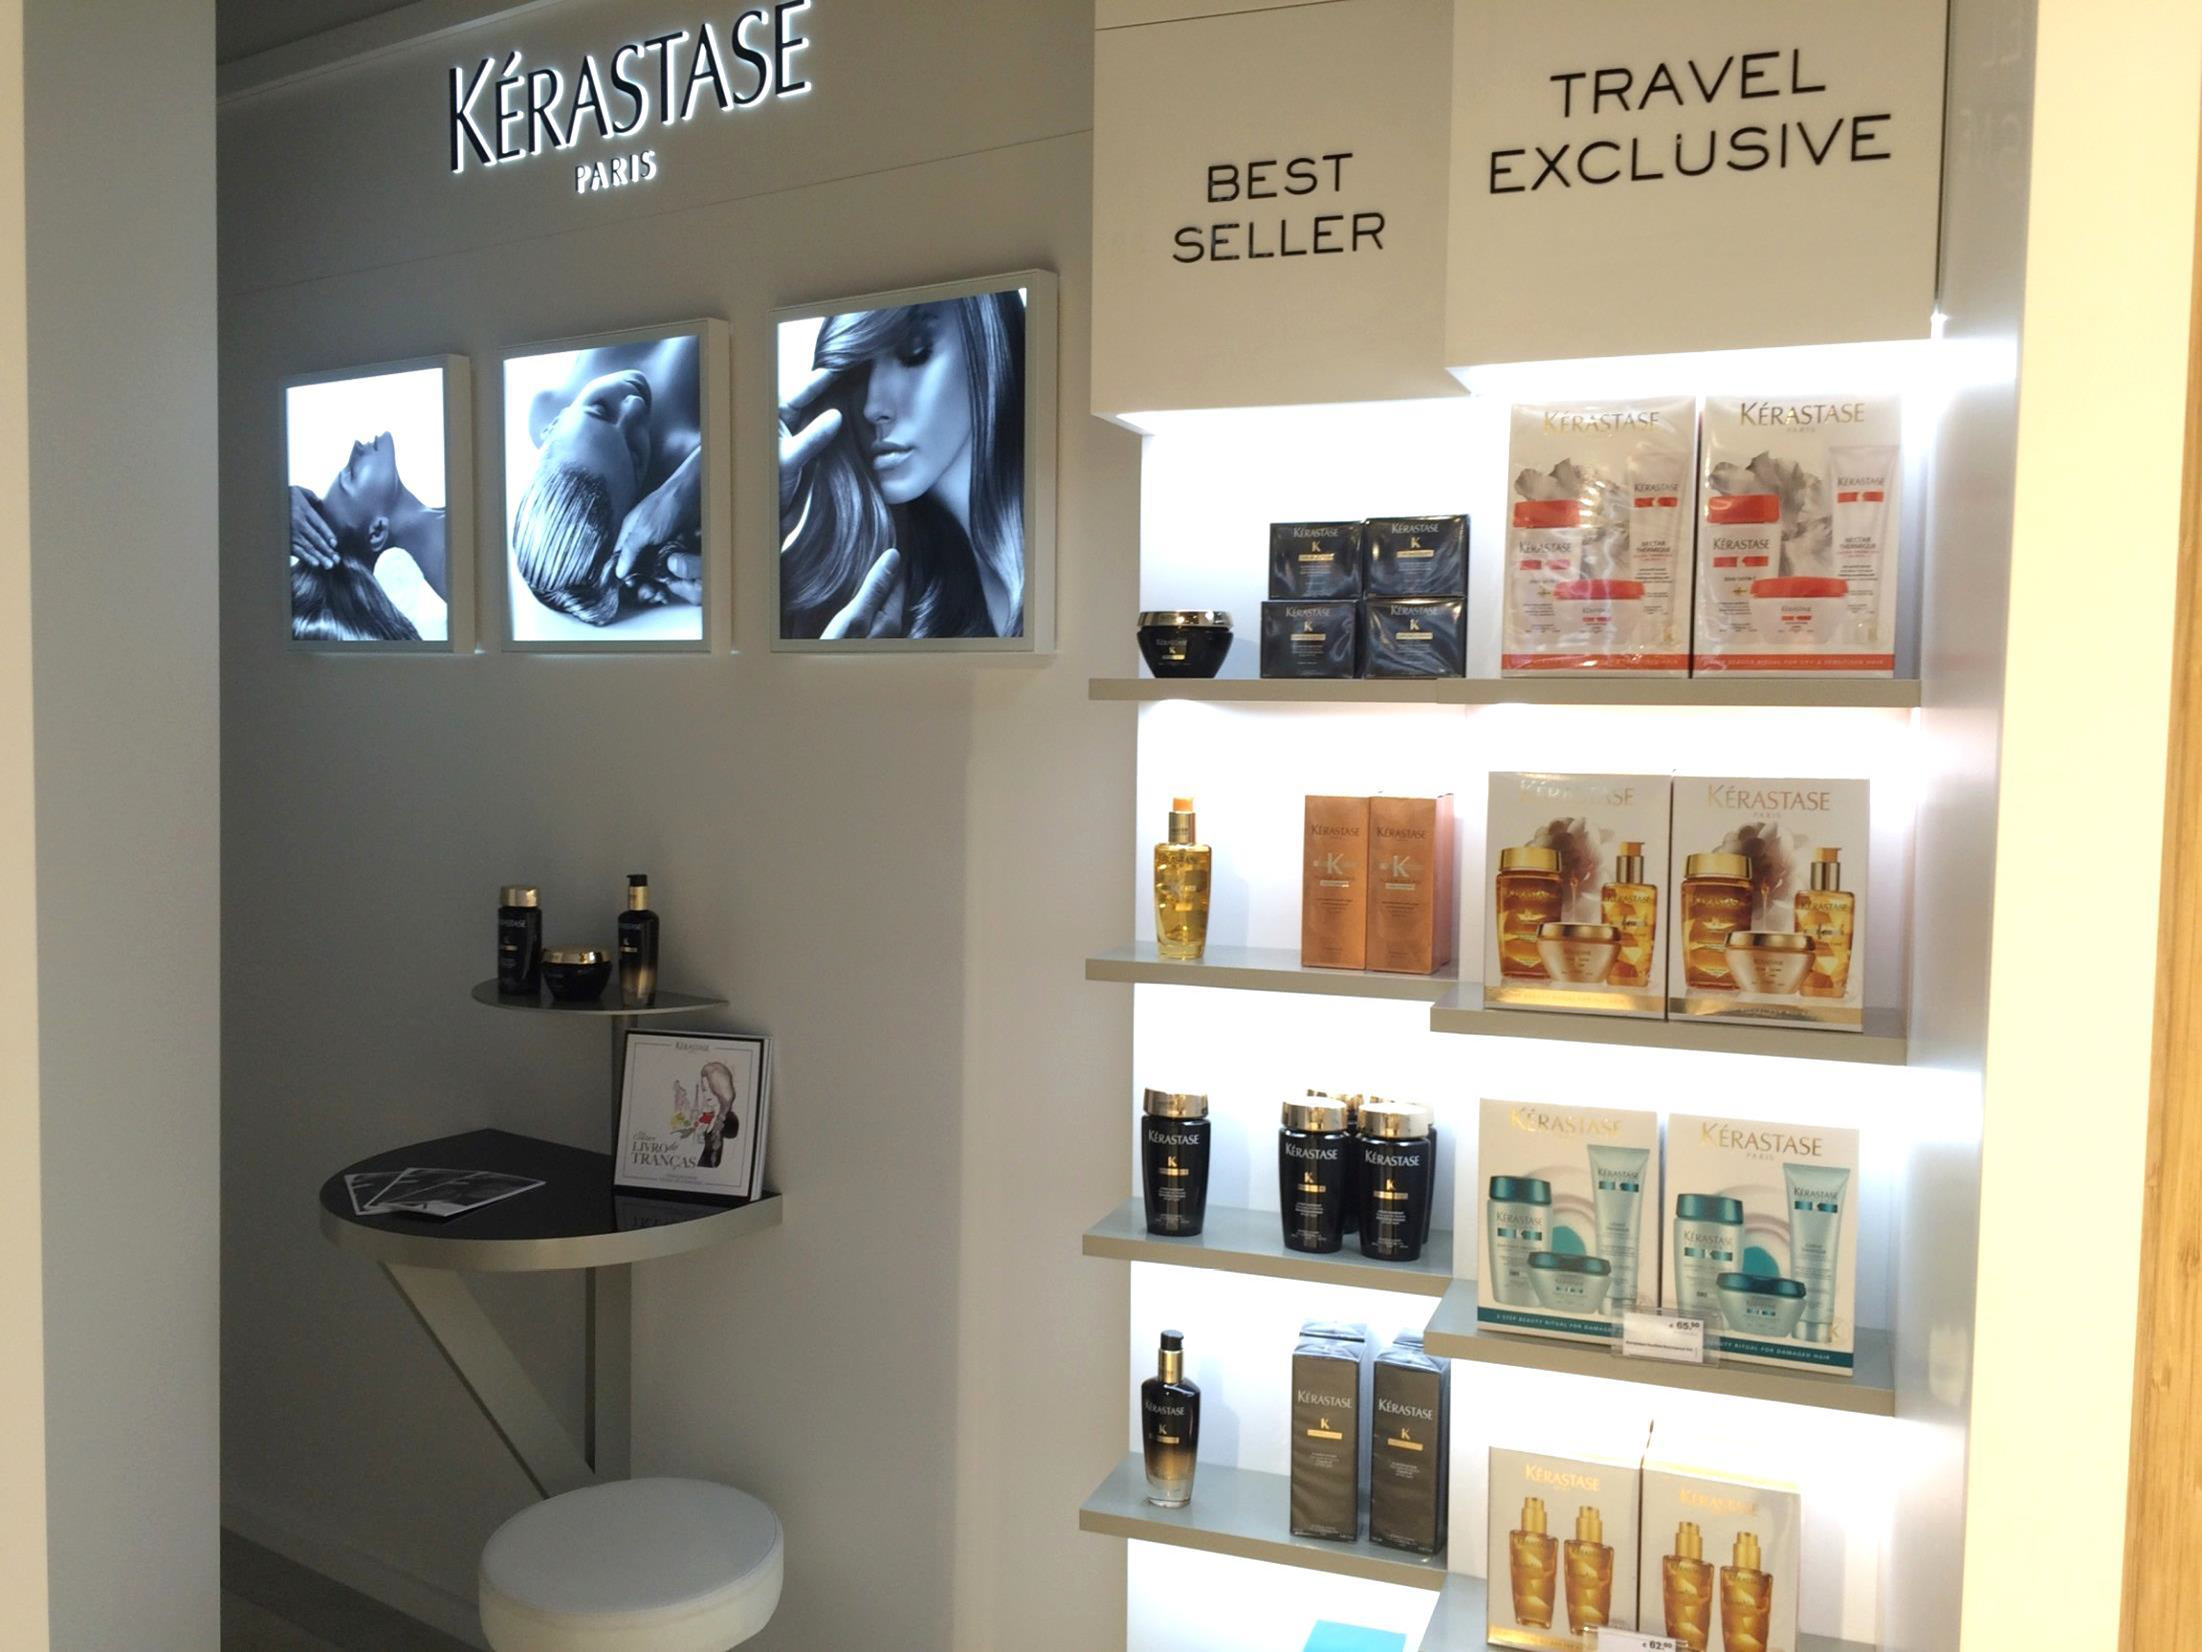 Kérastase is appealing to airport customers with travel retail exclusives 